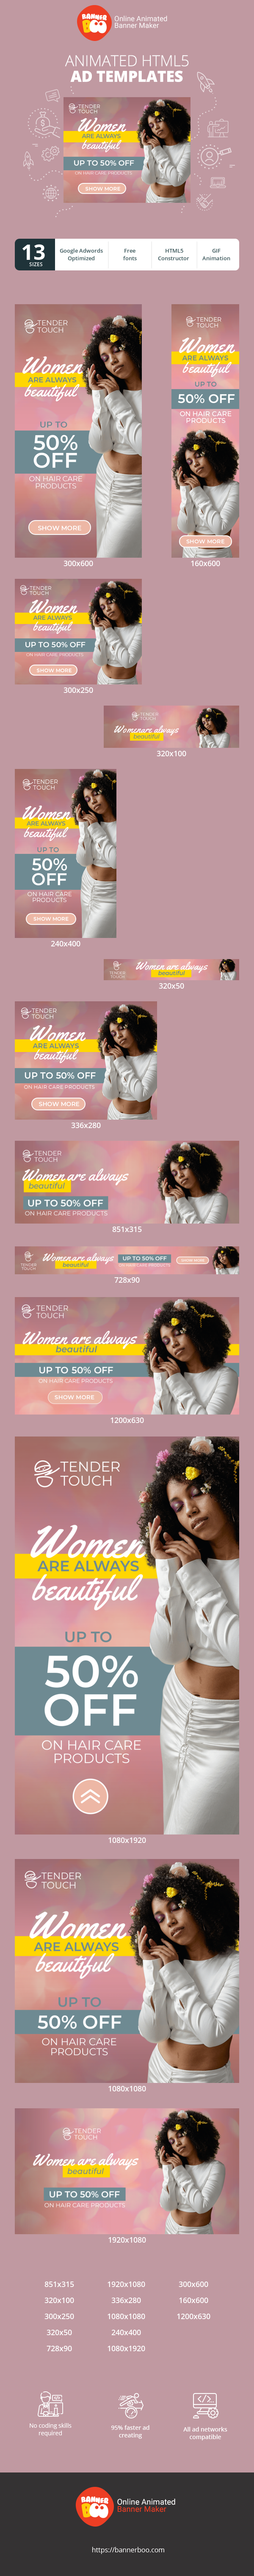 Banner ad template — Women Are Always Beautiful — Up To 50% Off On Hair Care Products